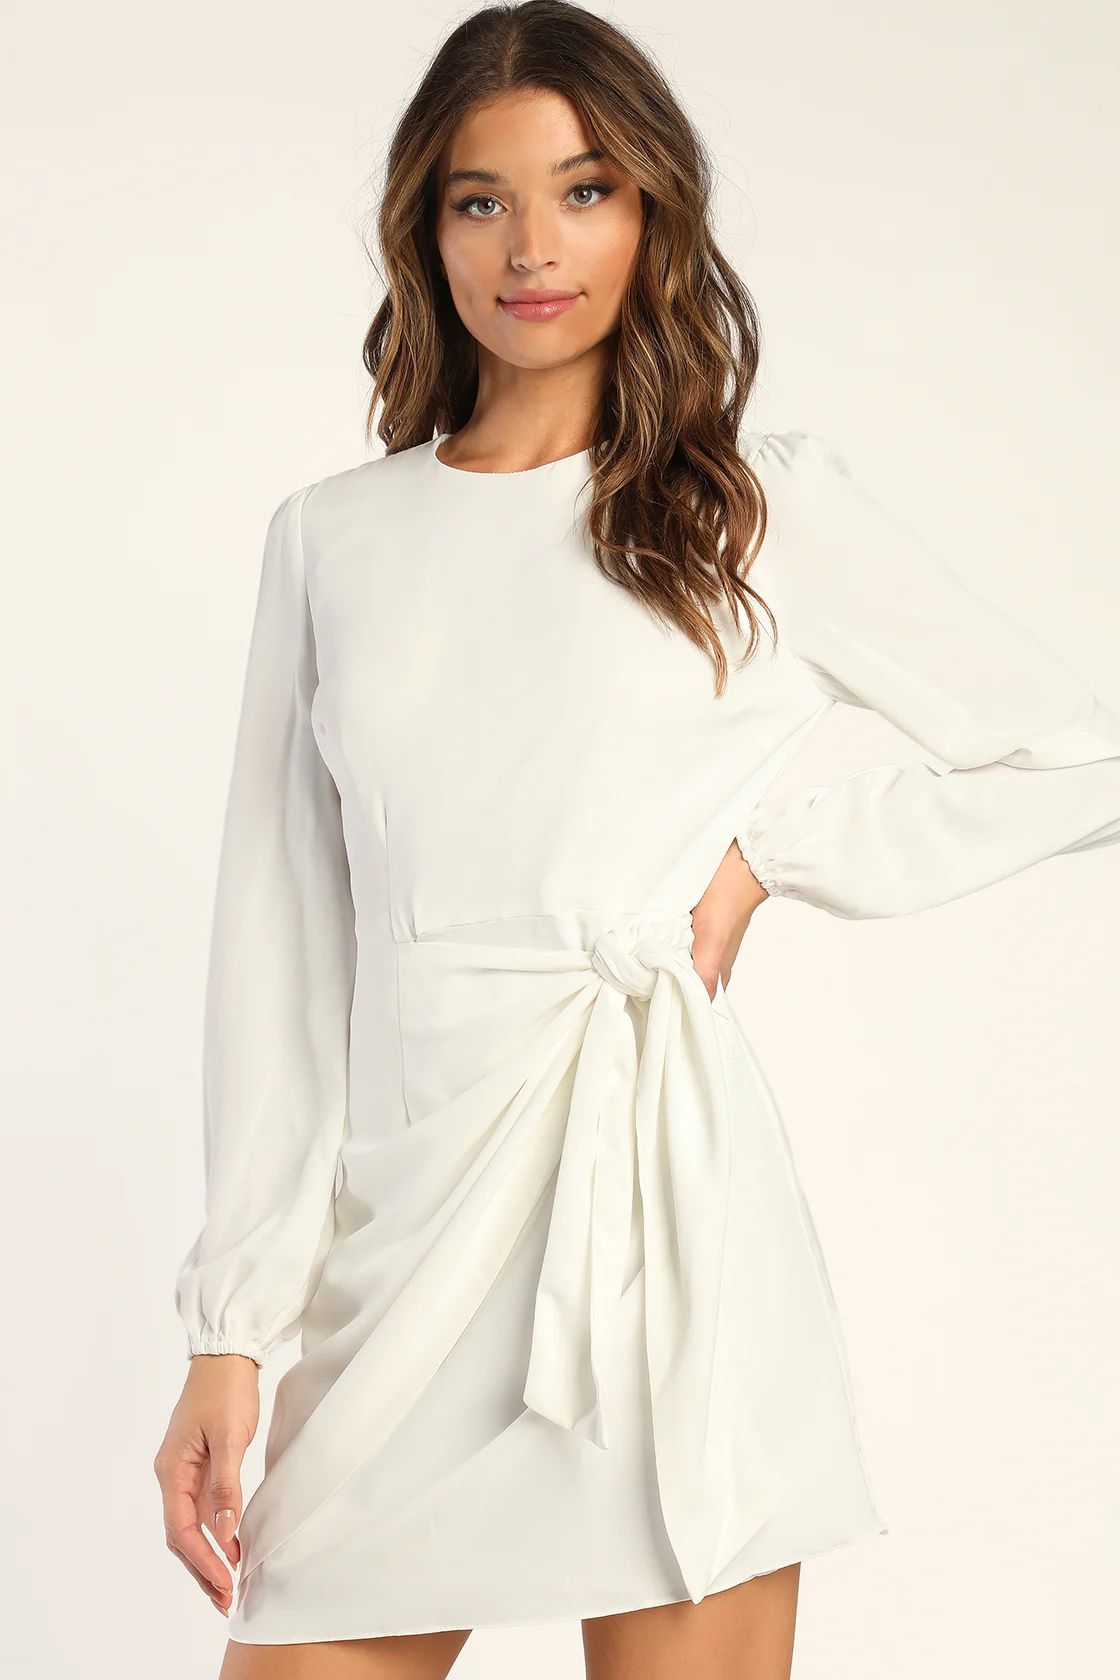 Believe It or Knot White Long Sleeve Tie-Front Skater Dress | Lulus (US)